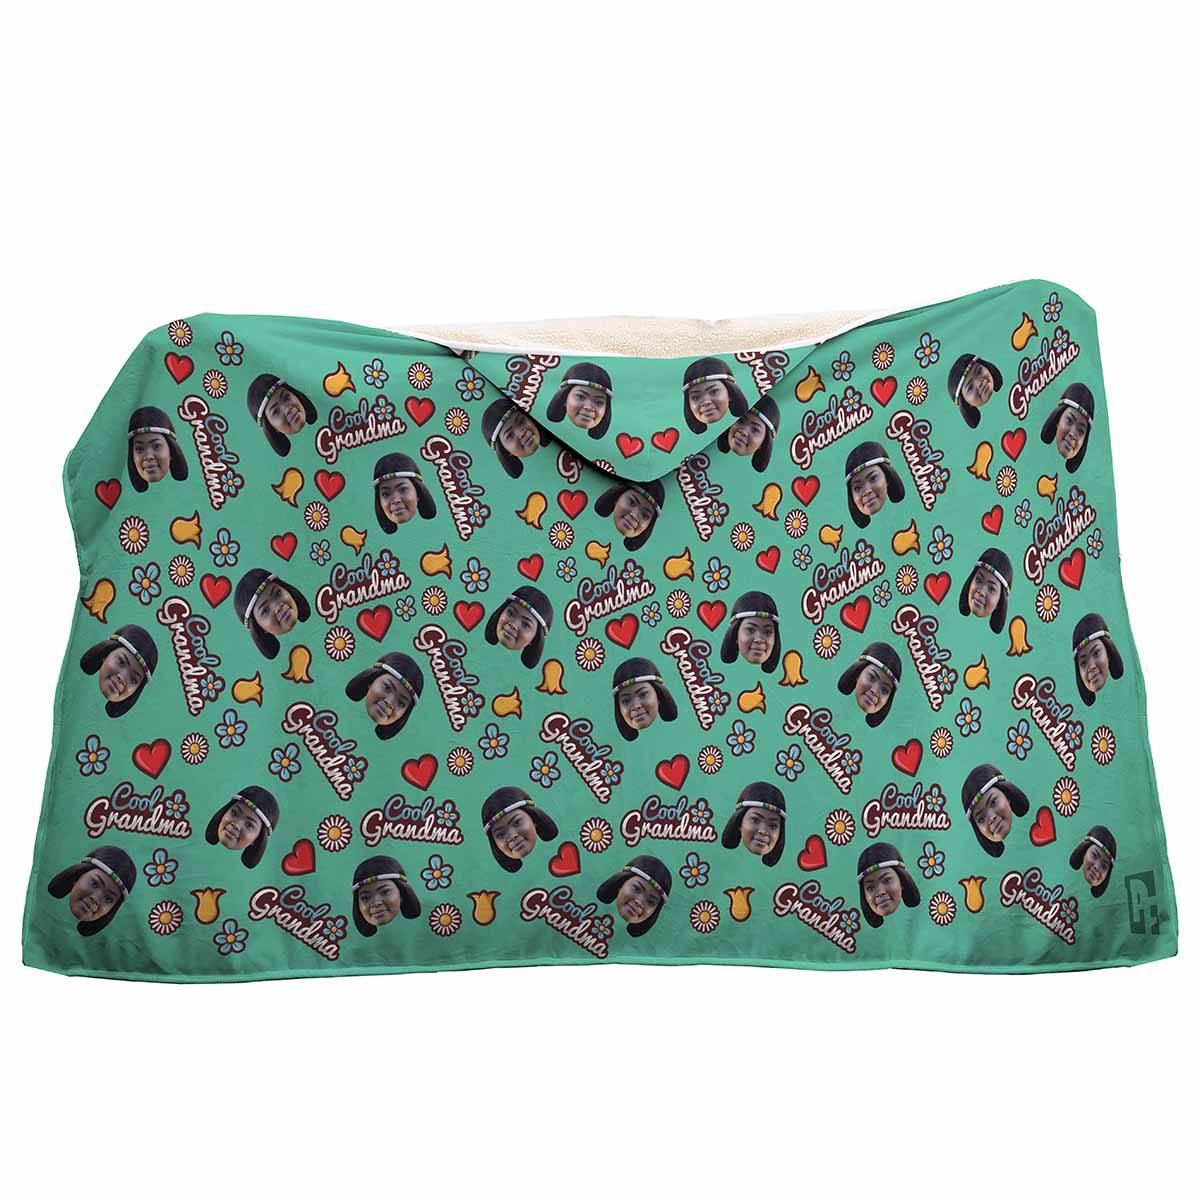 mint Cool Grandmother hooded blanket personalized with photo of face printed on it